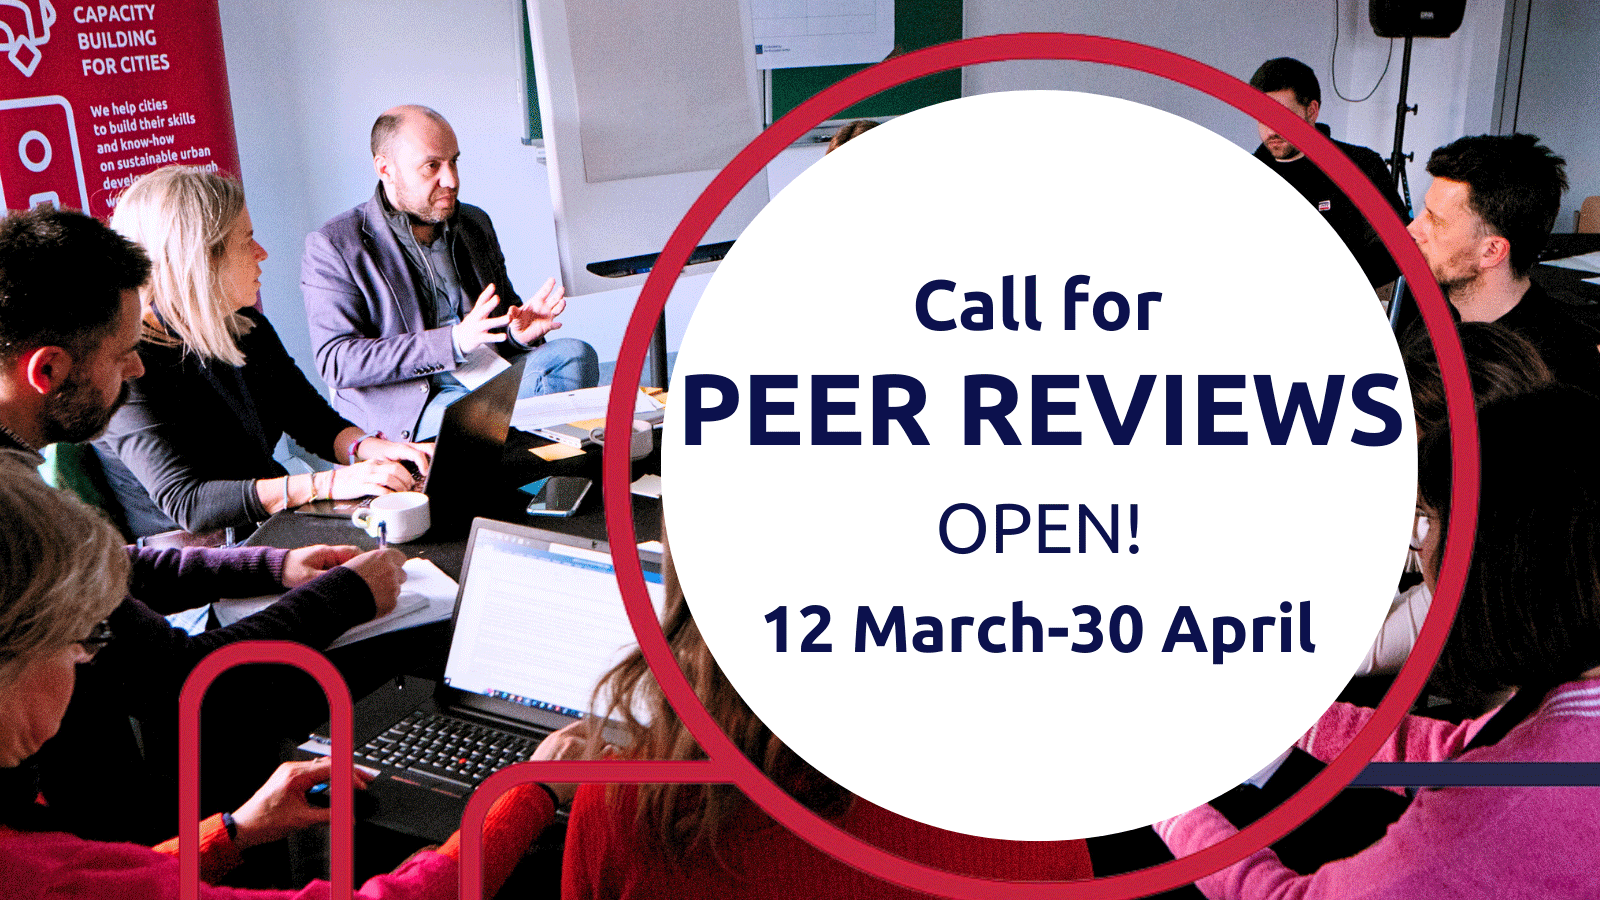 The European Urban Initiative launched a new call for Peer Reviews...